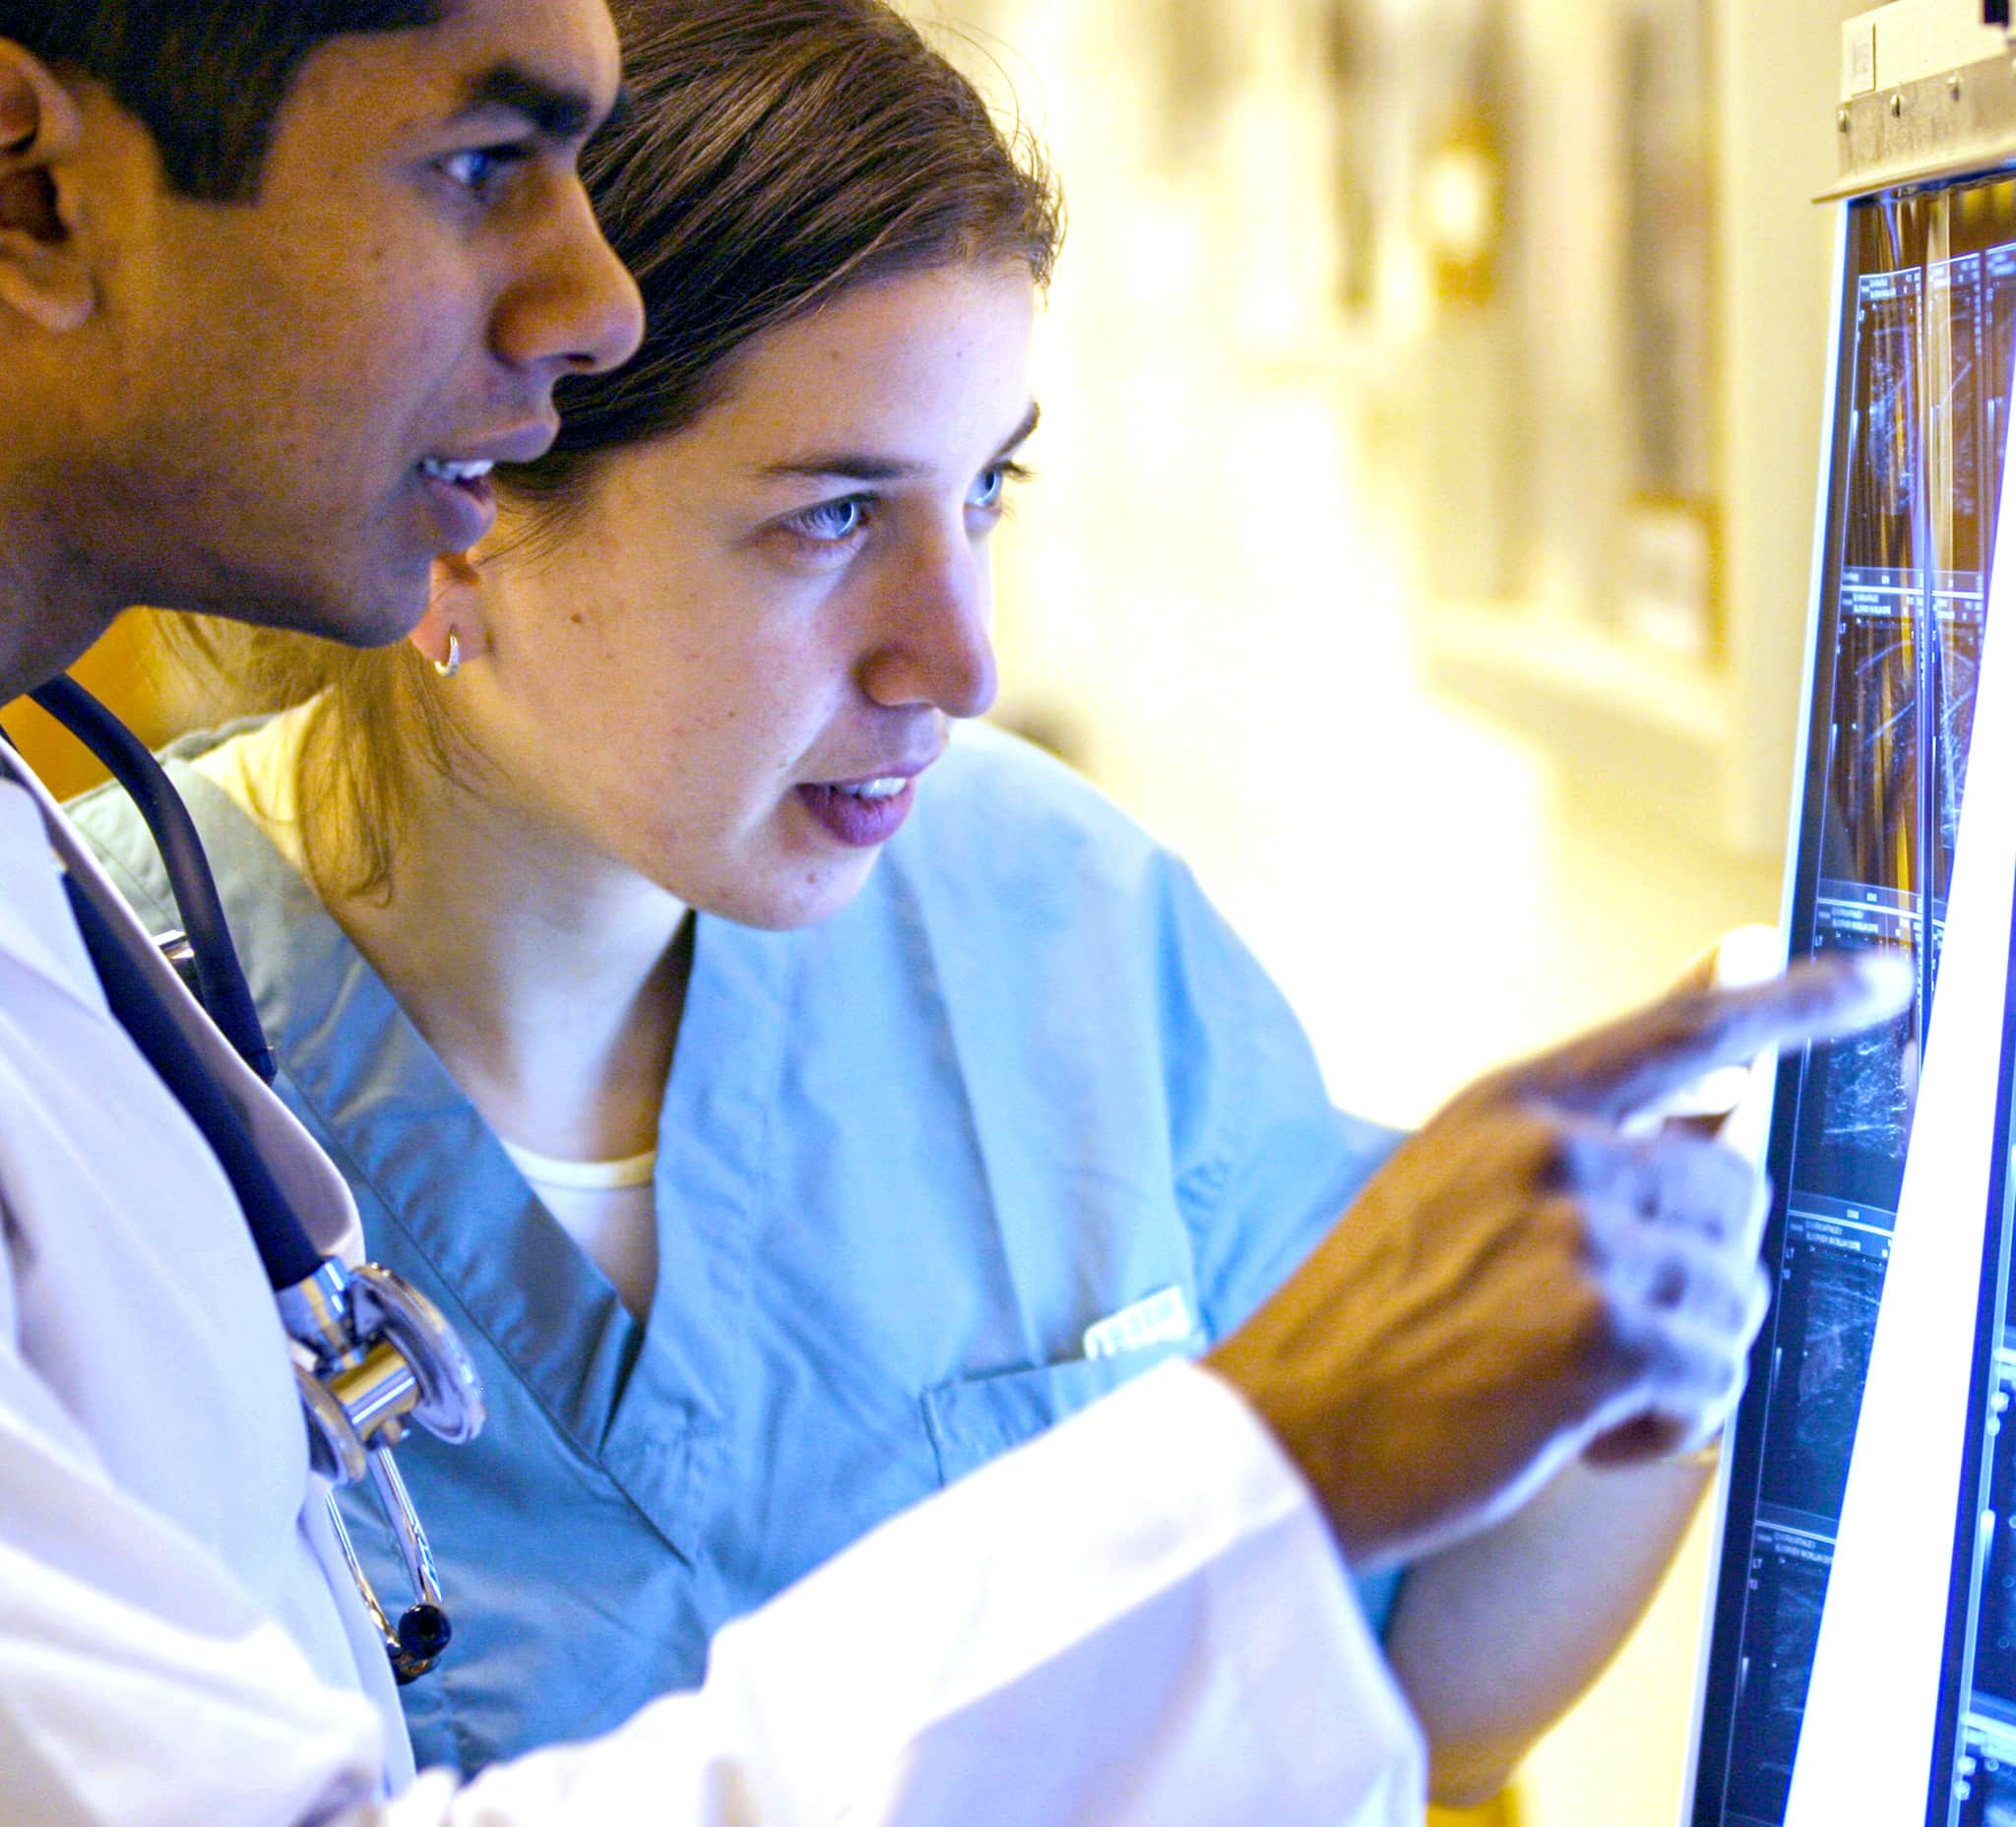 Two medical students, wearing scrubs and stethoscope, examine a grid of x-ray images.